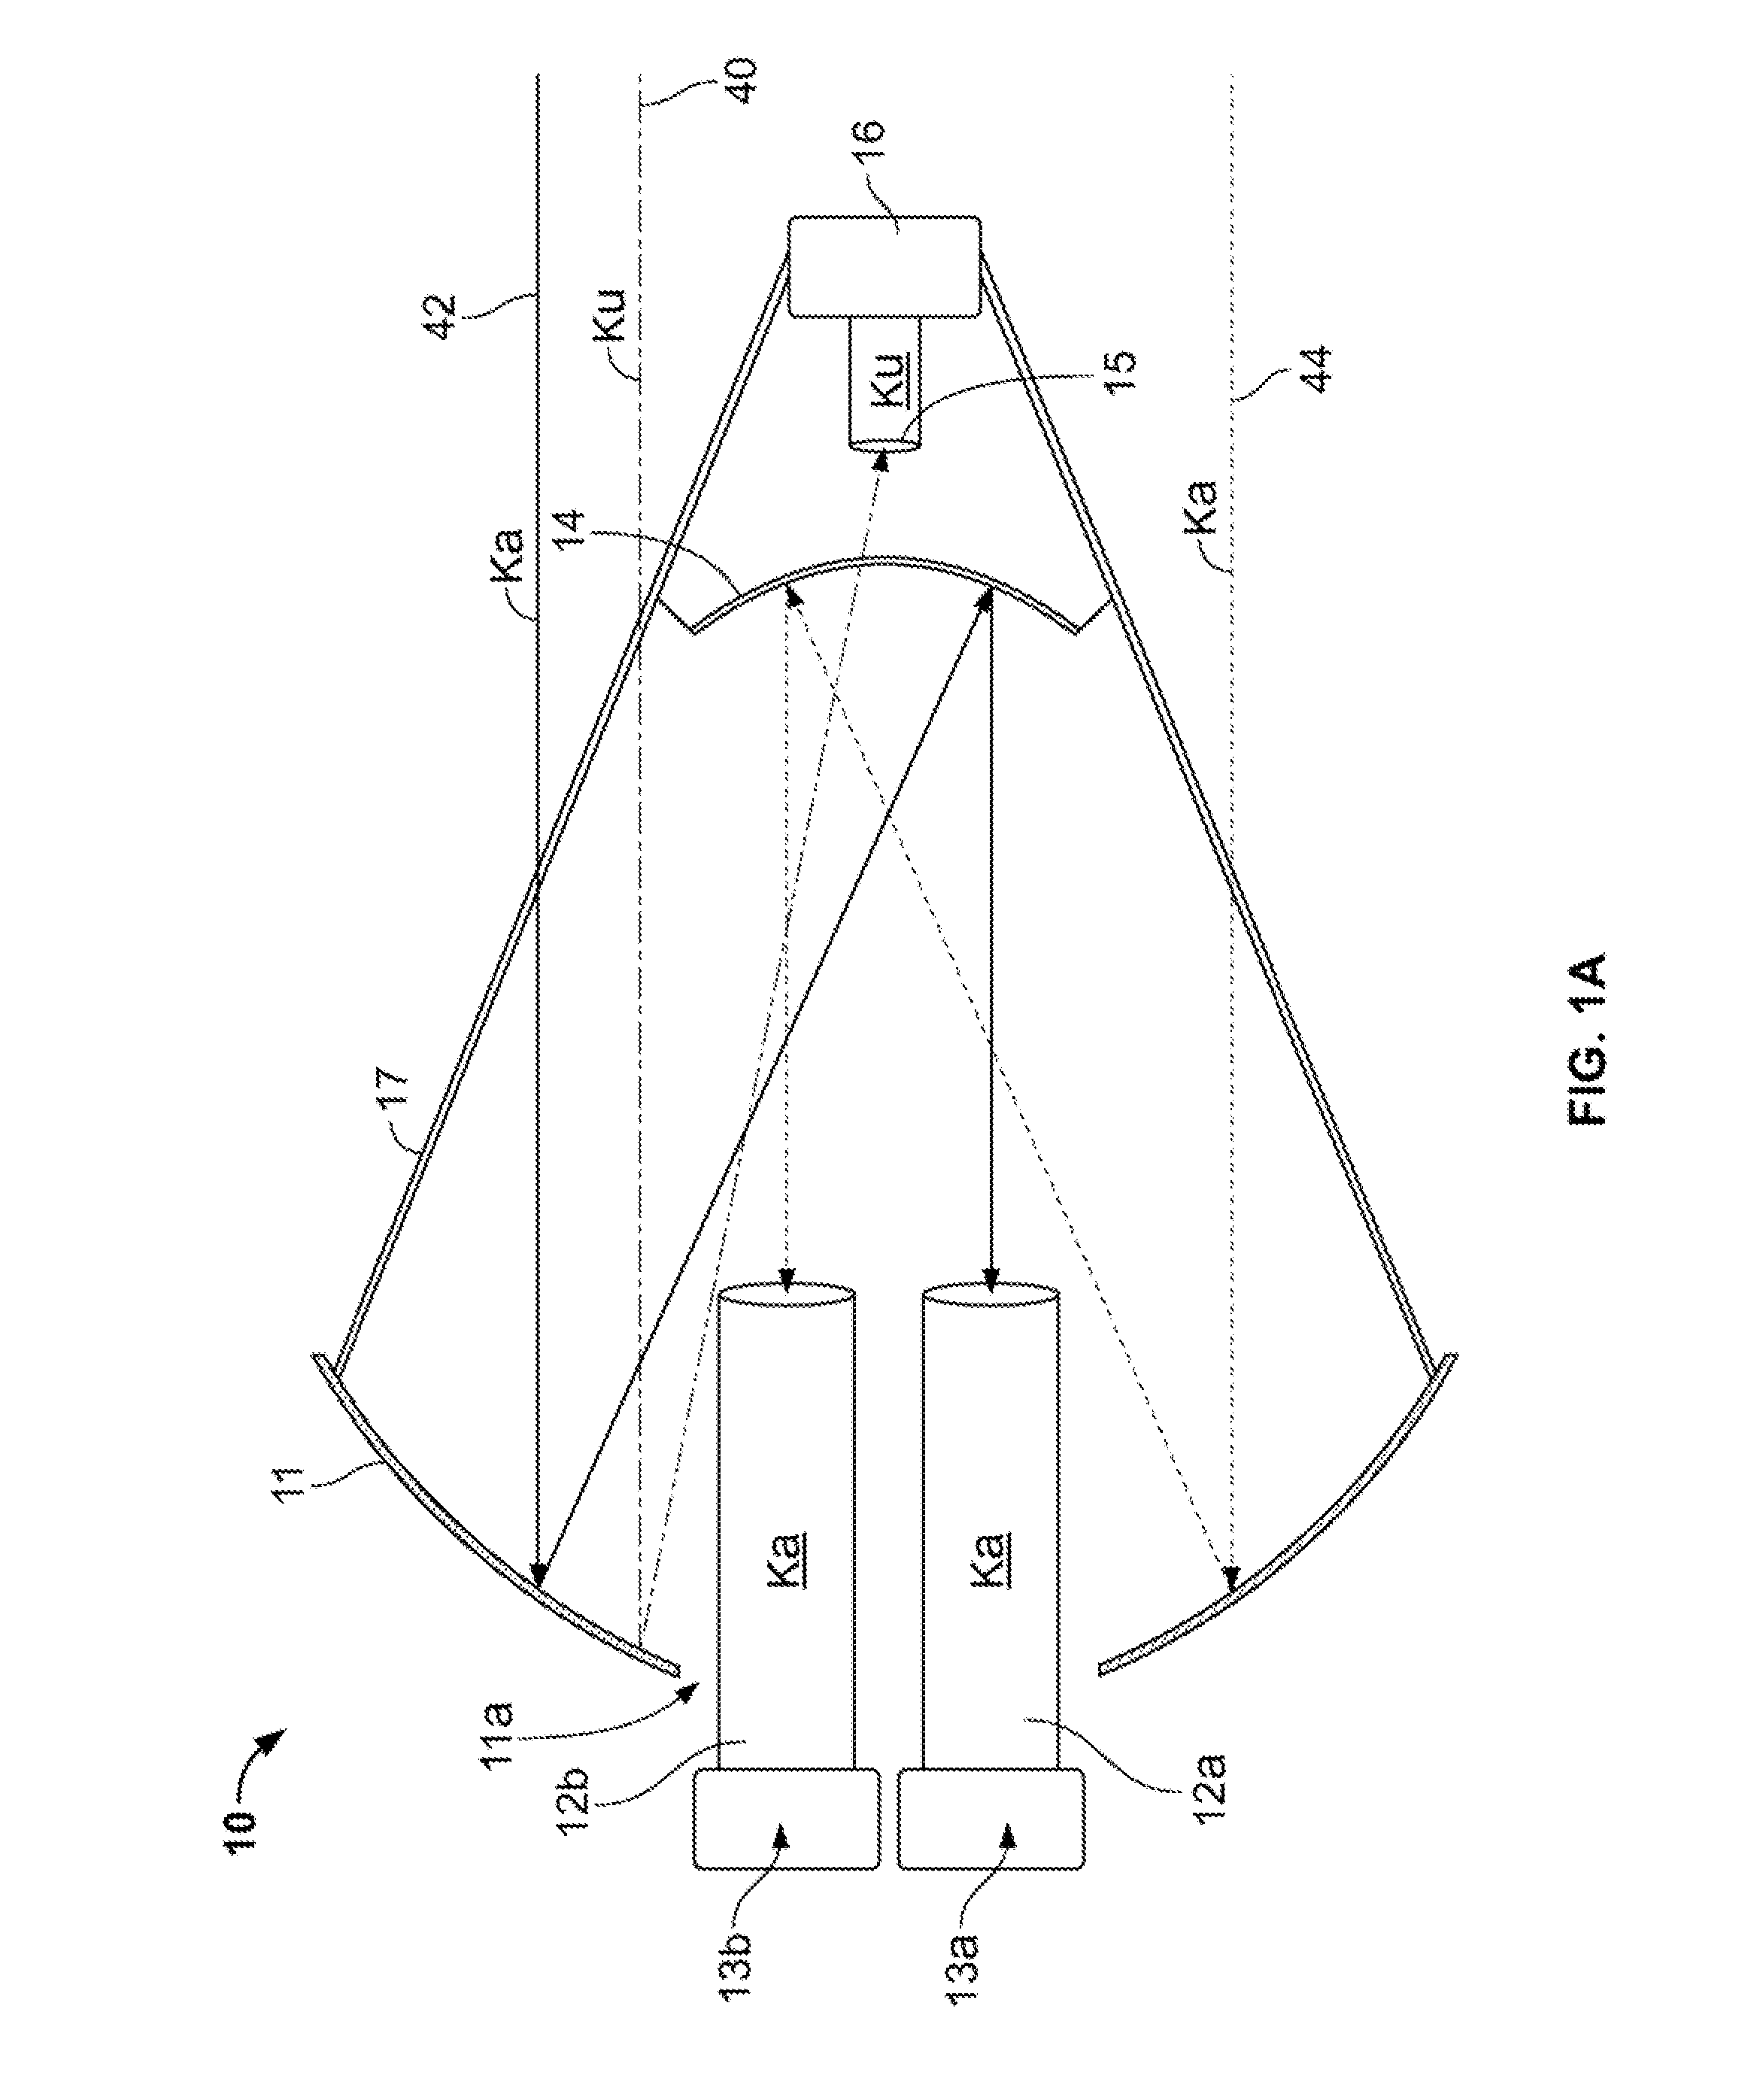 Multi-Band Antenna System for Satellite Communications